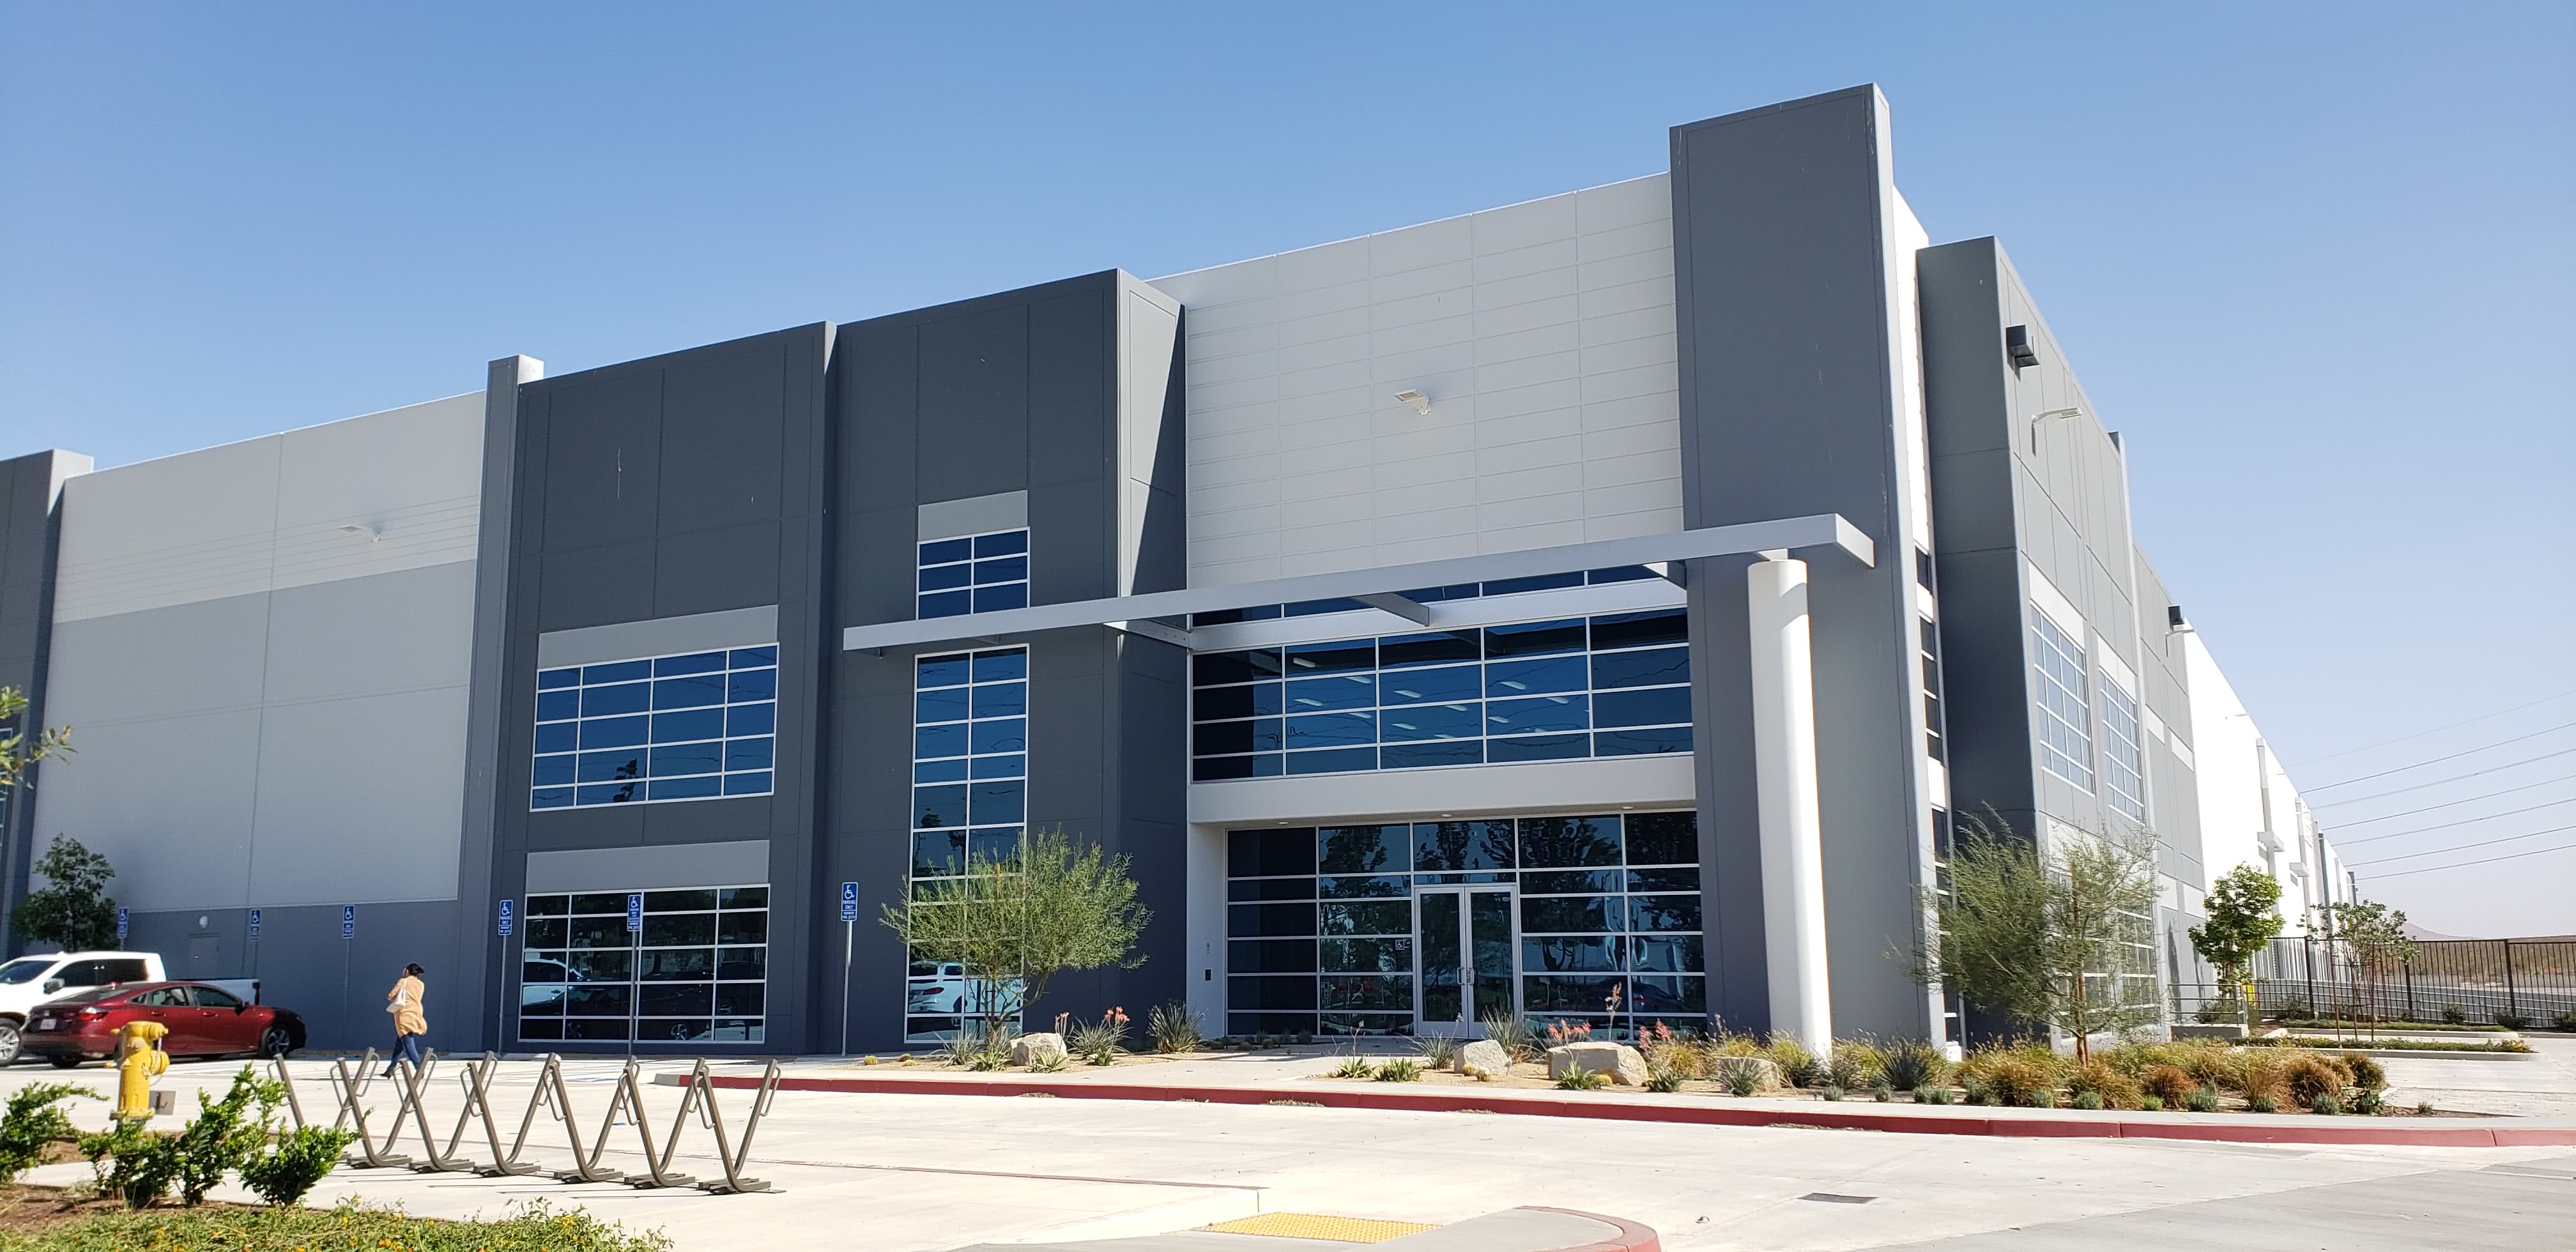 Newegg Grows Company’s Presence in Southern California with Expansive New 3PL Facility